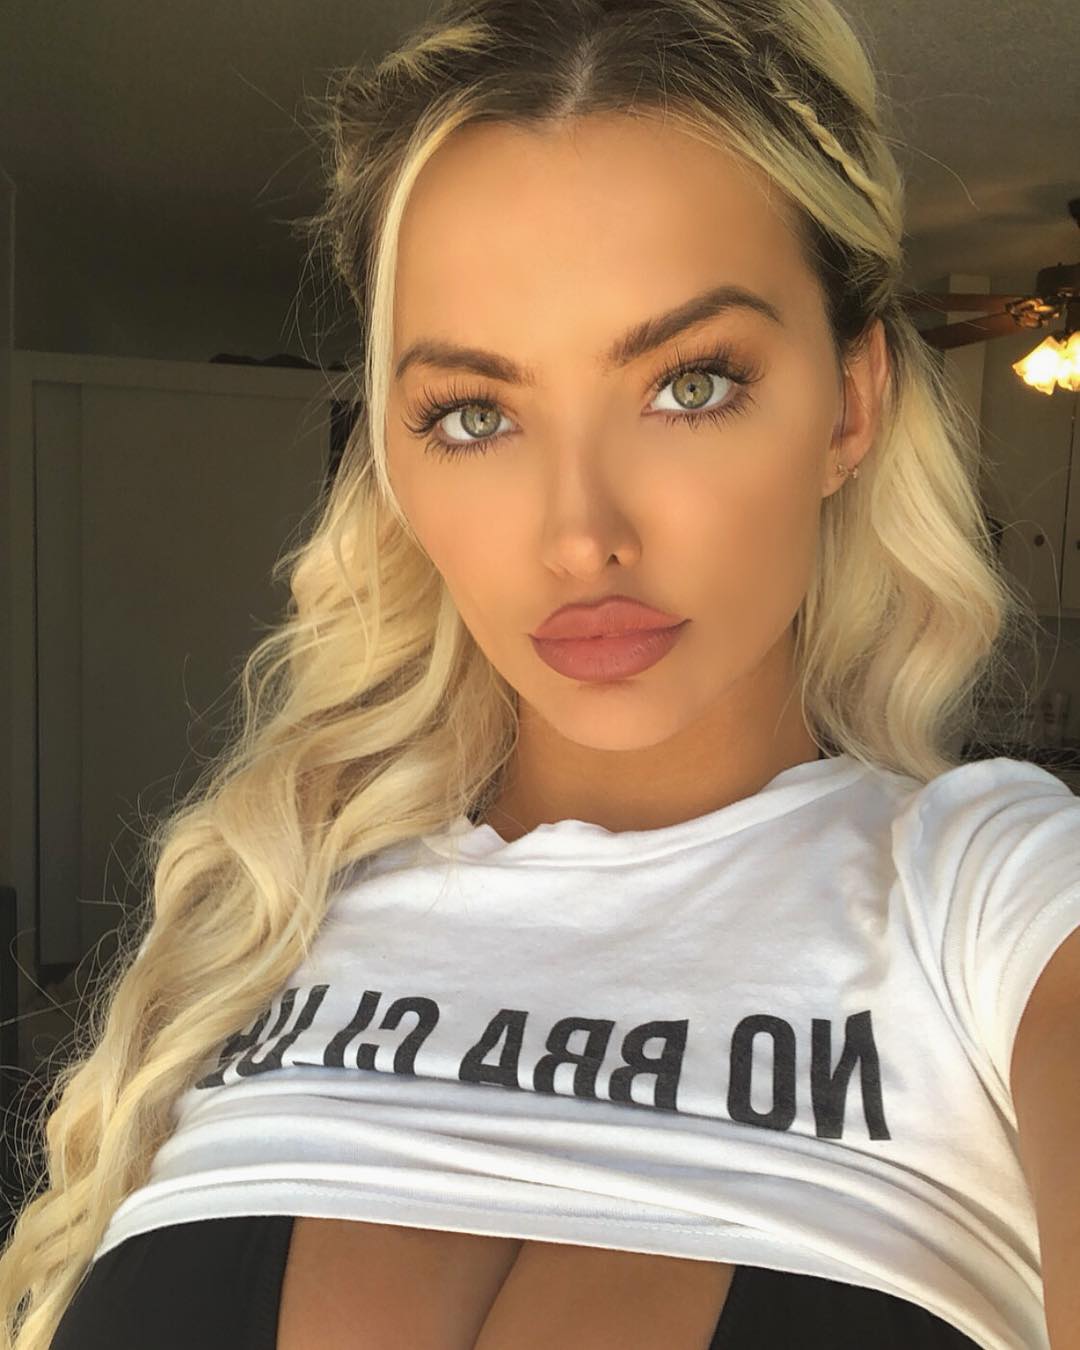 Lindsey Pela Dd Picture Of Lindsey Pelas Showtainment 